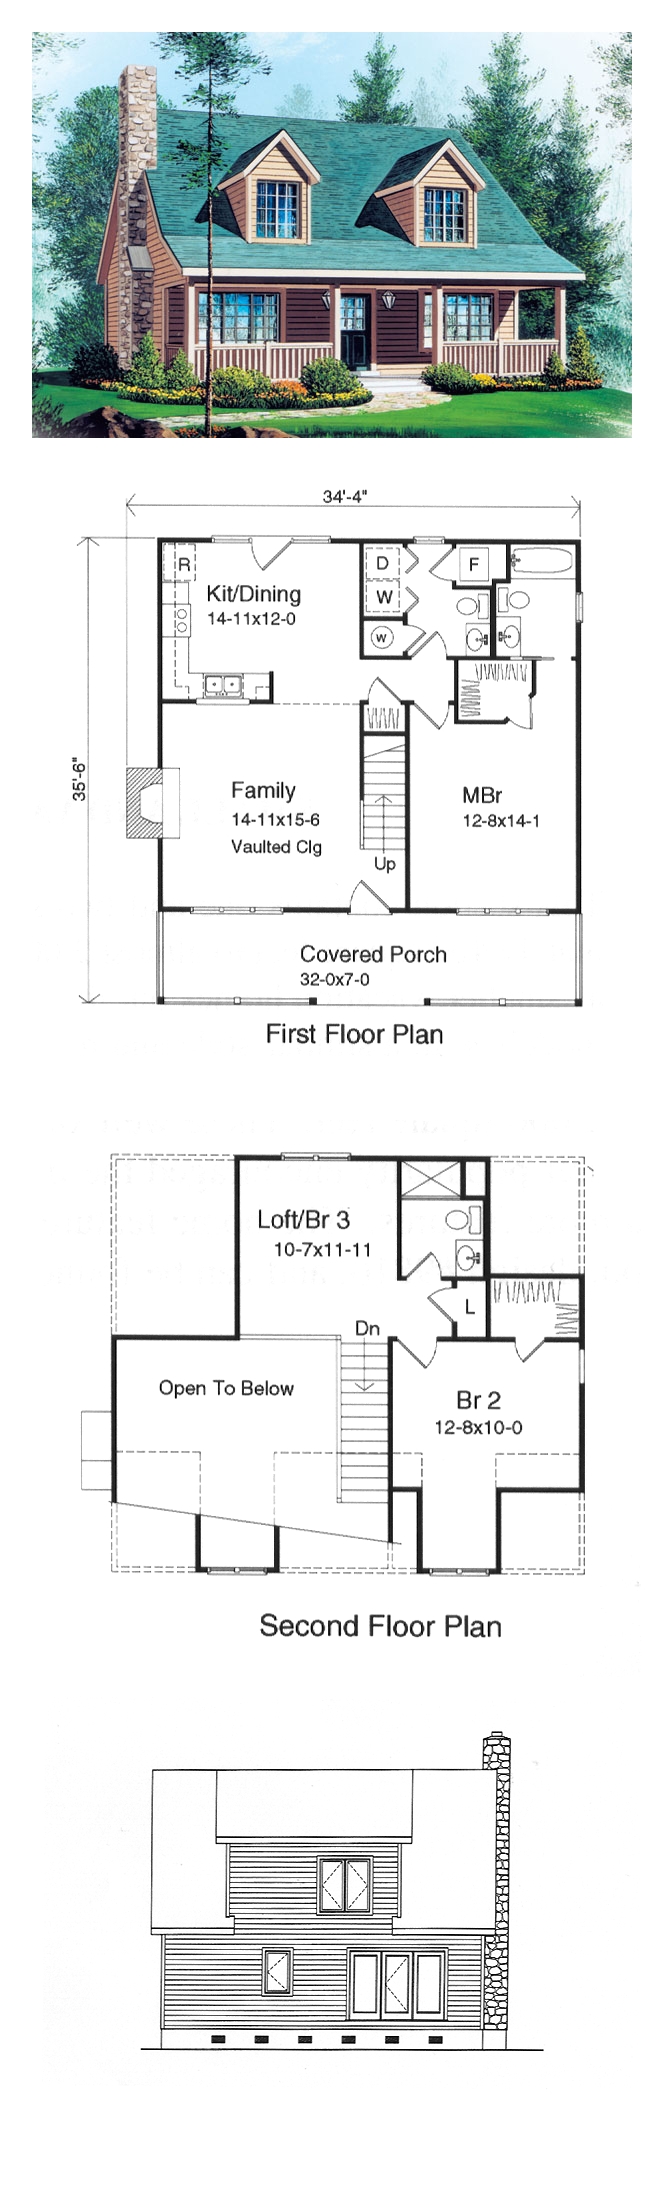 ranch house floor plan house plans ranch style 1 story house plans best split floor plans